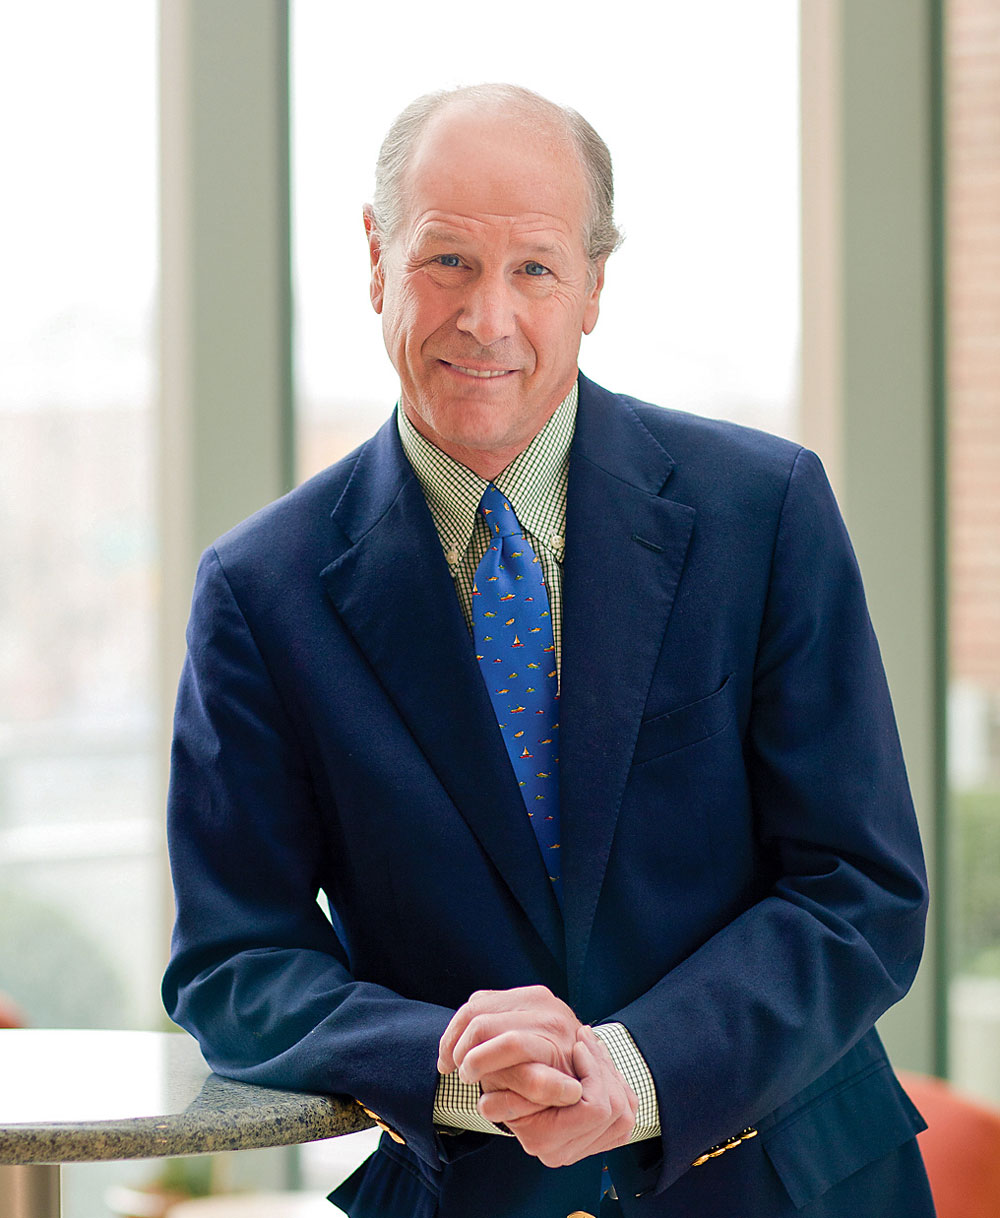 Griffith served on Bucknell’s Board of Trustees during the development of the University’s biomedical engineering program, helping to establish networks with his medical colleagues and a pipeline for externships and research partnerships